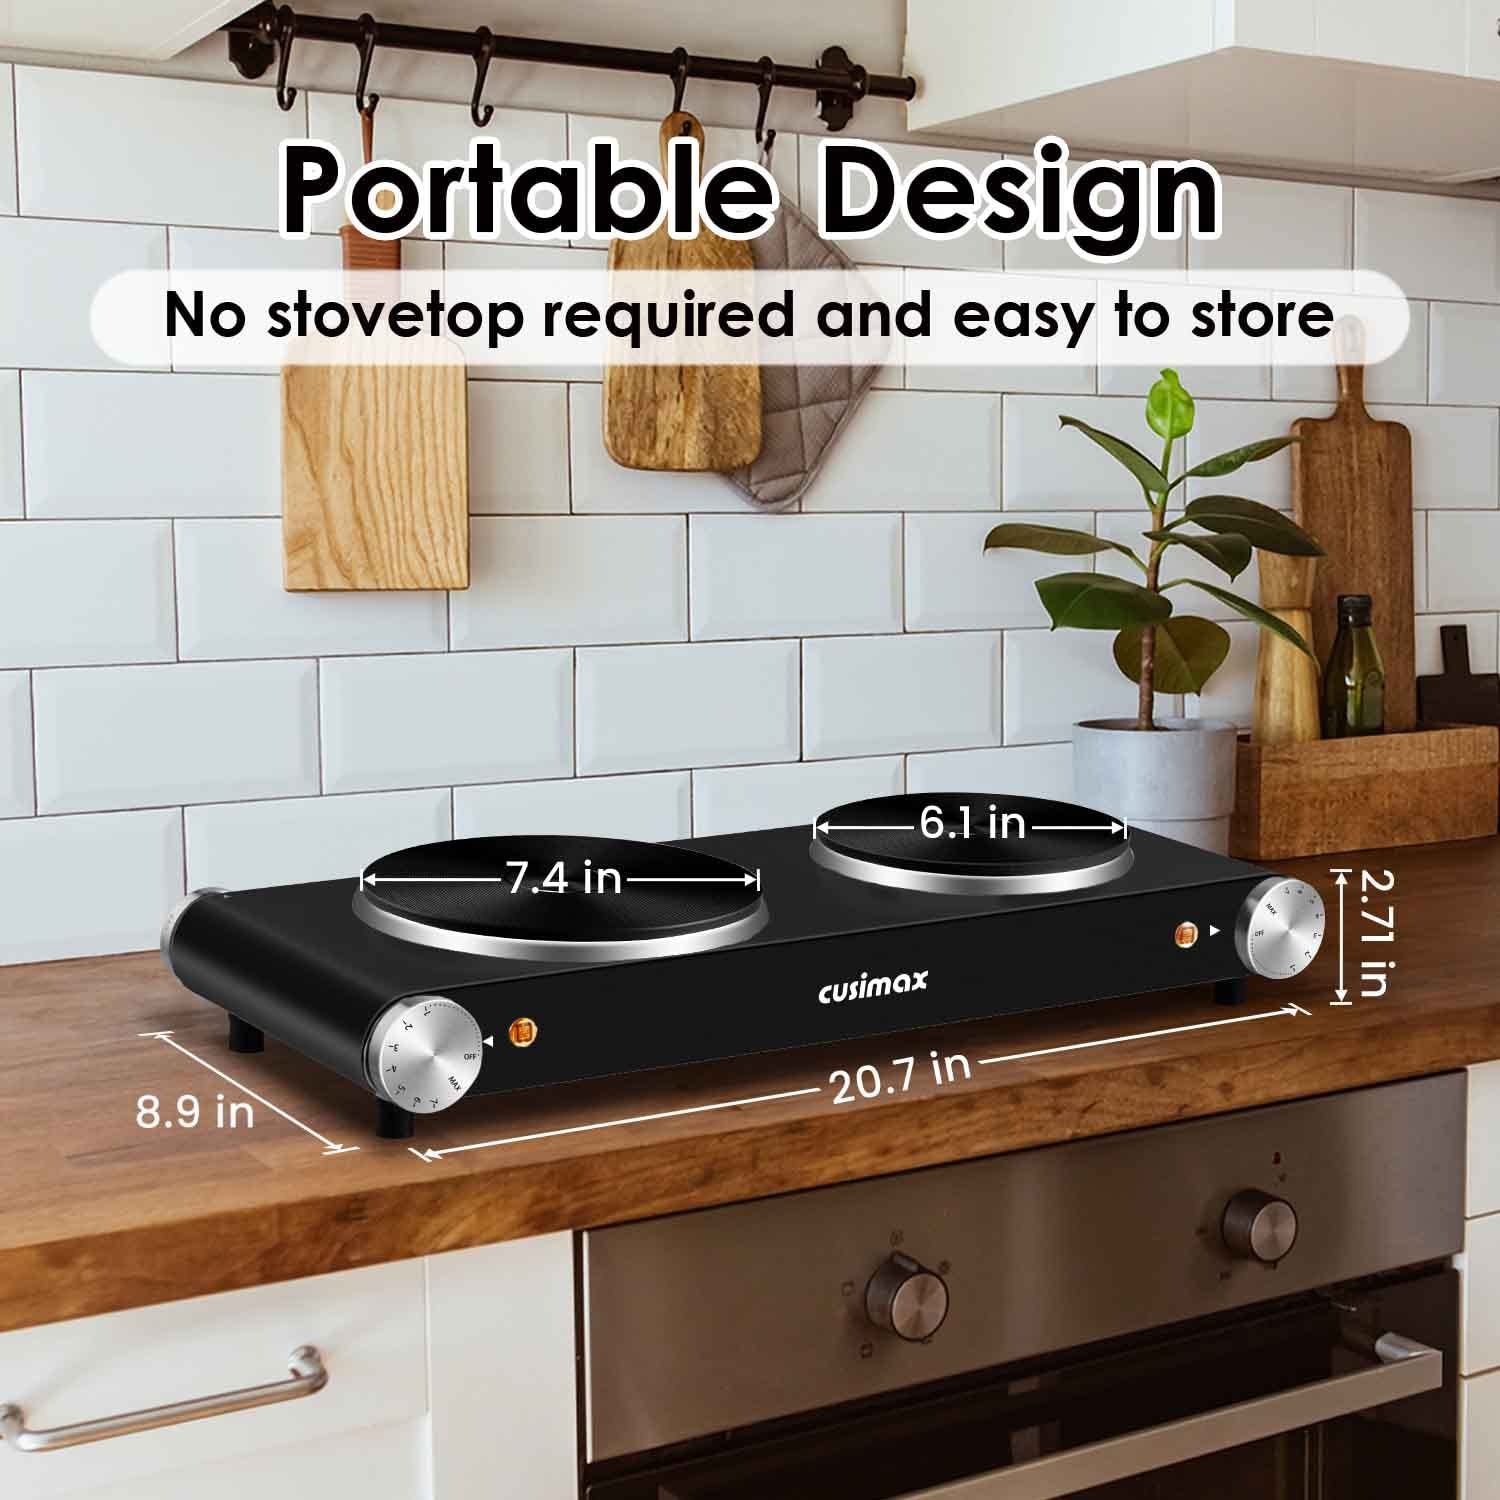  Hot Plate, CUSIMAX Double Burner Hot Plate for Cooking, 1800W  Dual Control Portable Stove Countertop Electric Burner Infrared Cooktop,  Stainless Steel Black Marble: Home & Kitchen